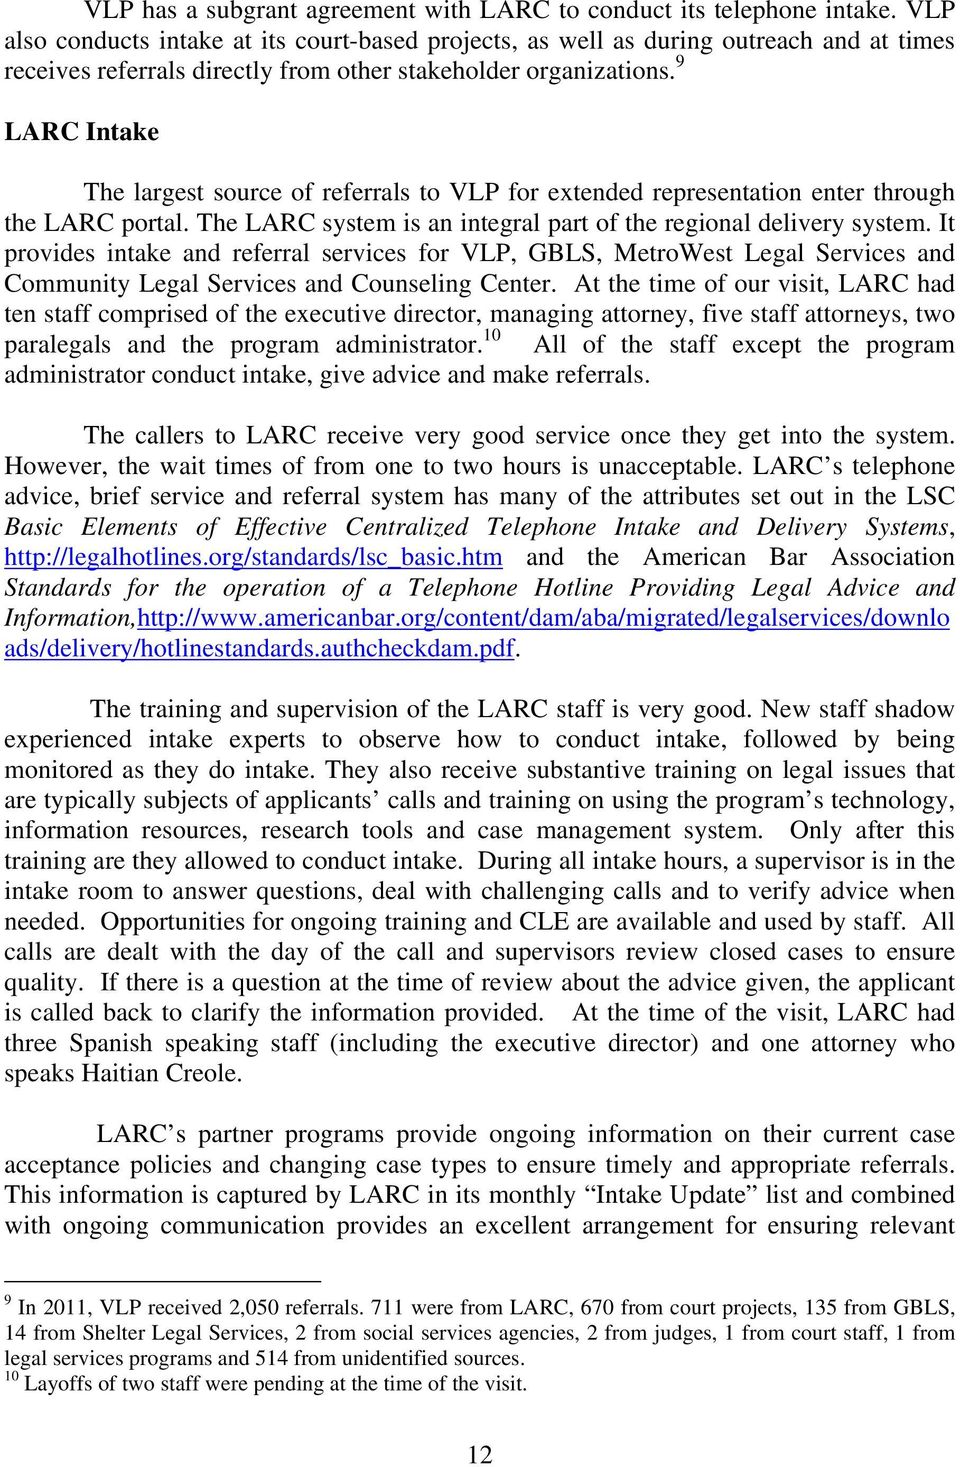 9 LARC Intake The largest source of referrals to VLP for extended representation enter through the LARC portal. The LARC system is an integral part of the regional delivery system.